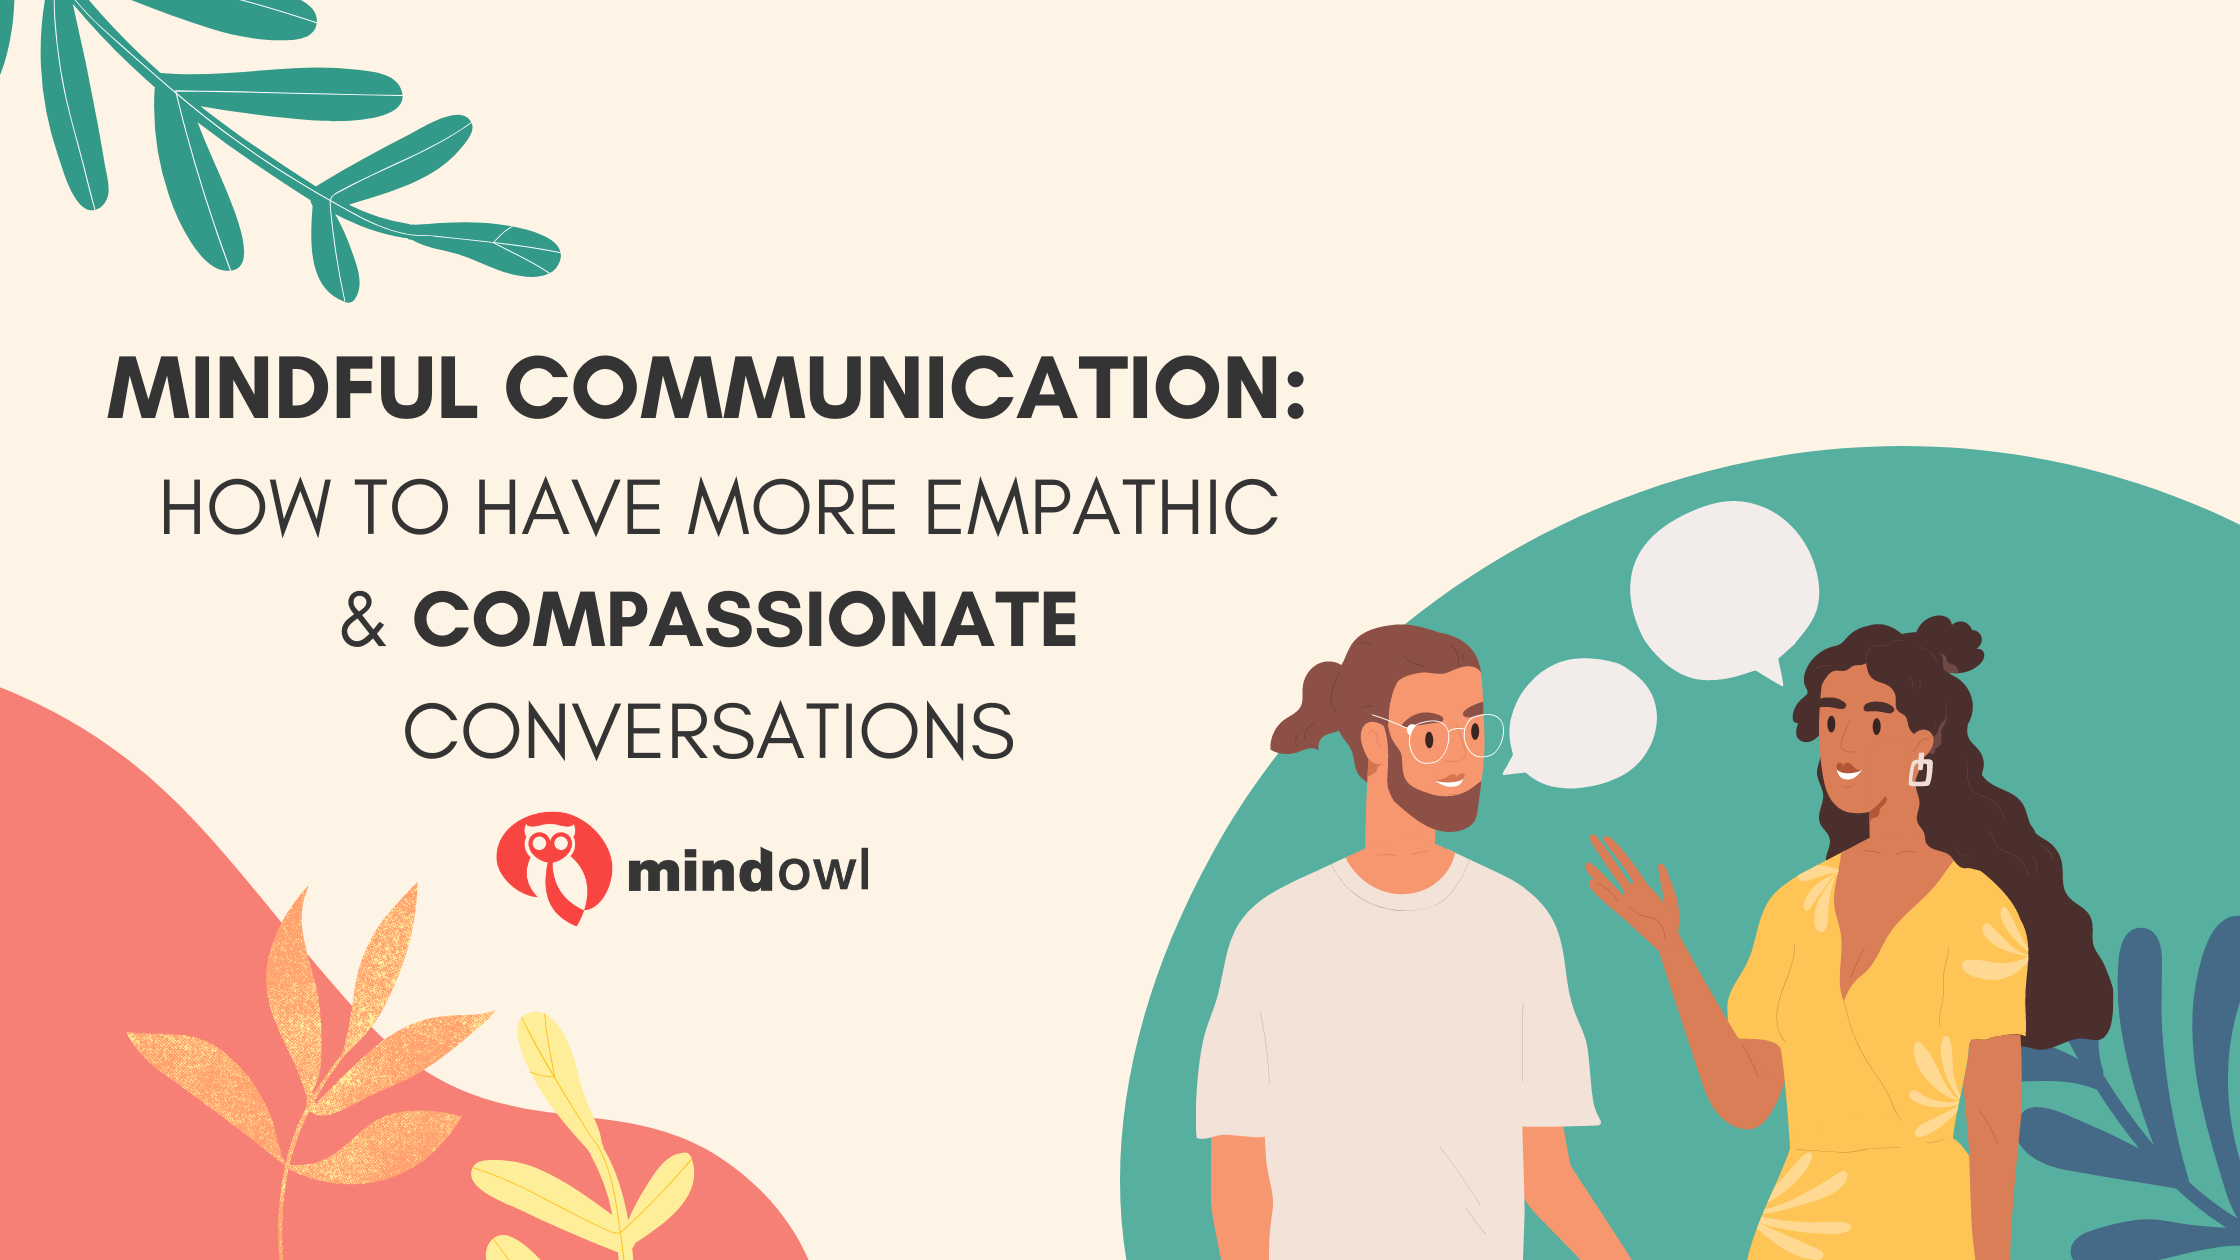 Mindful Communication: How to Have More Empathic & Compassionate Conversations